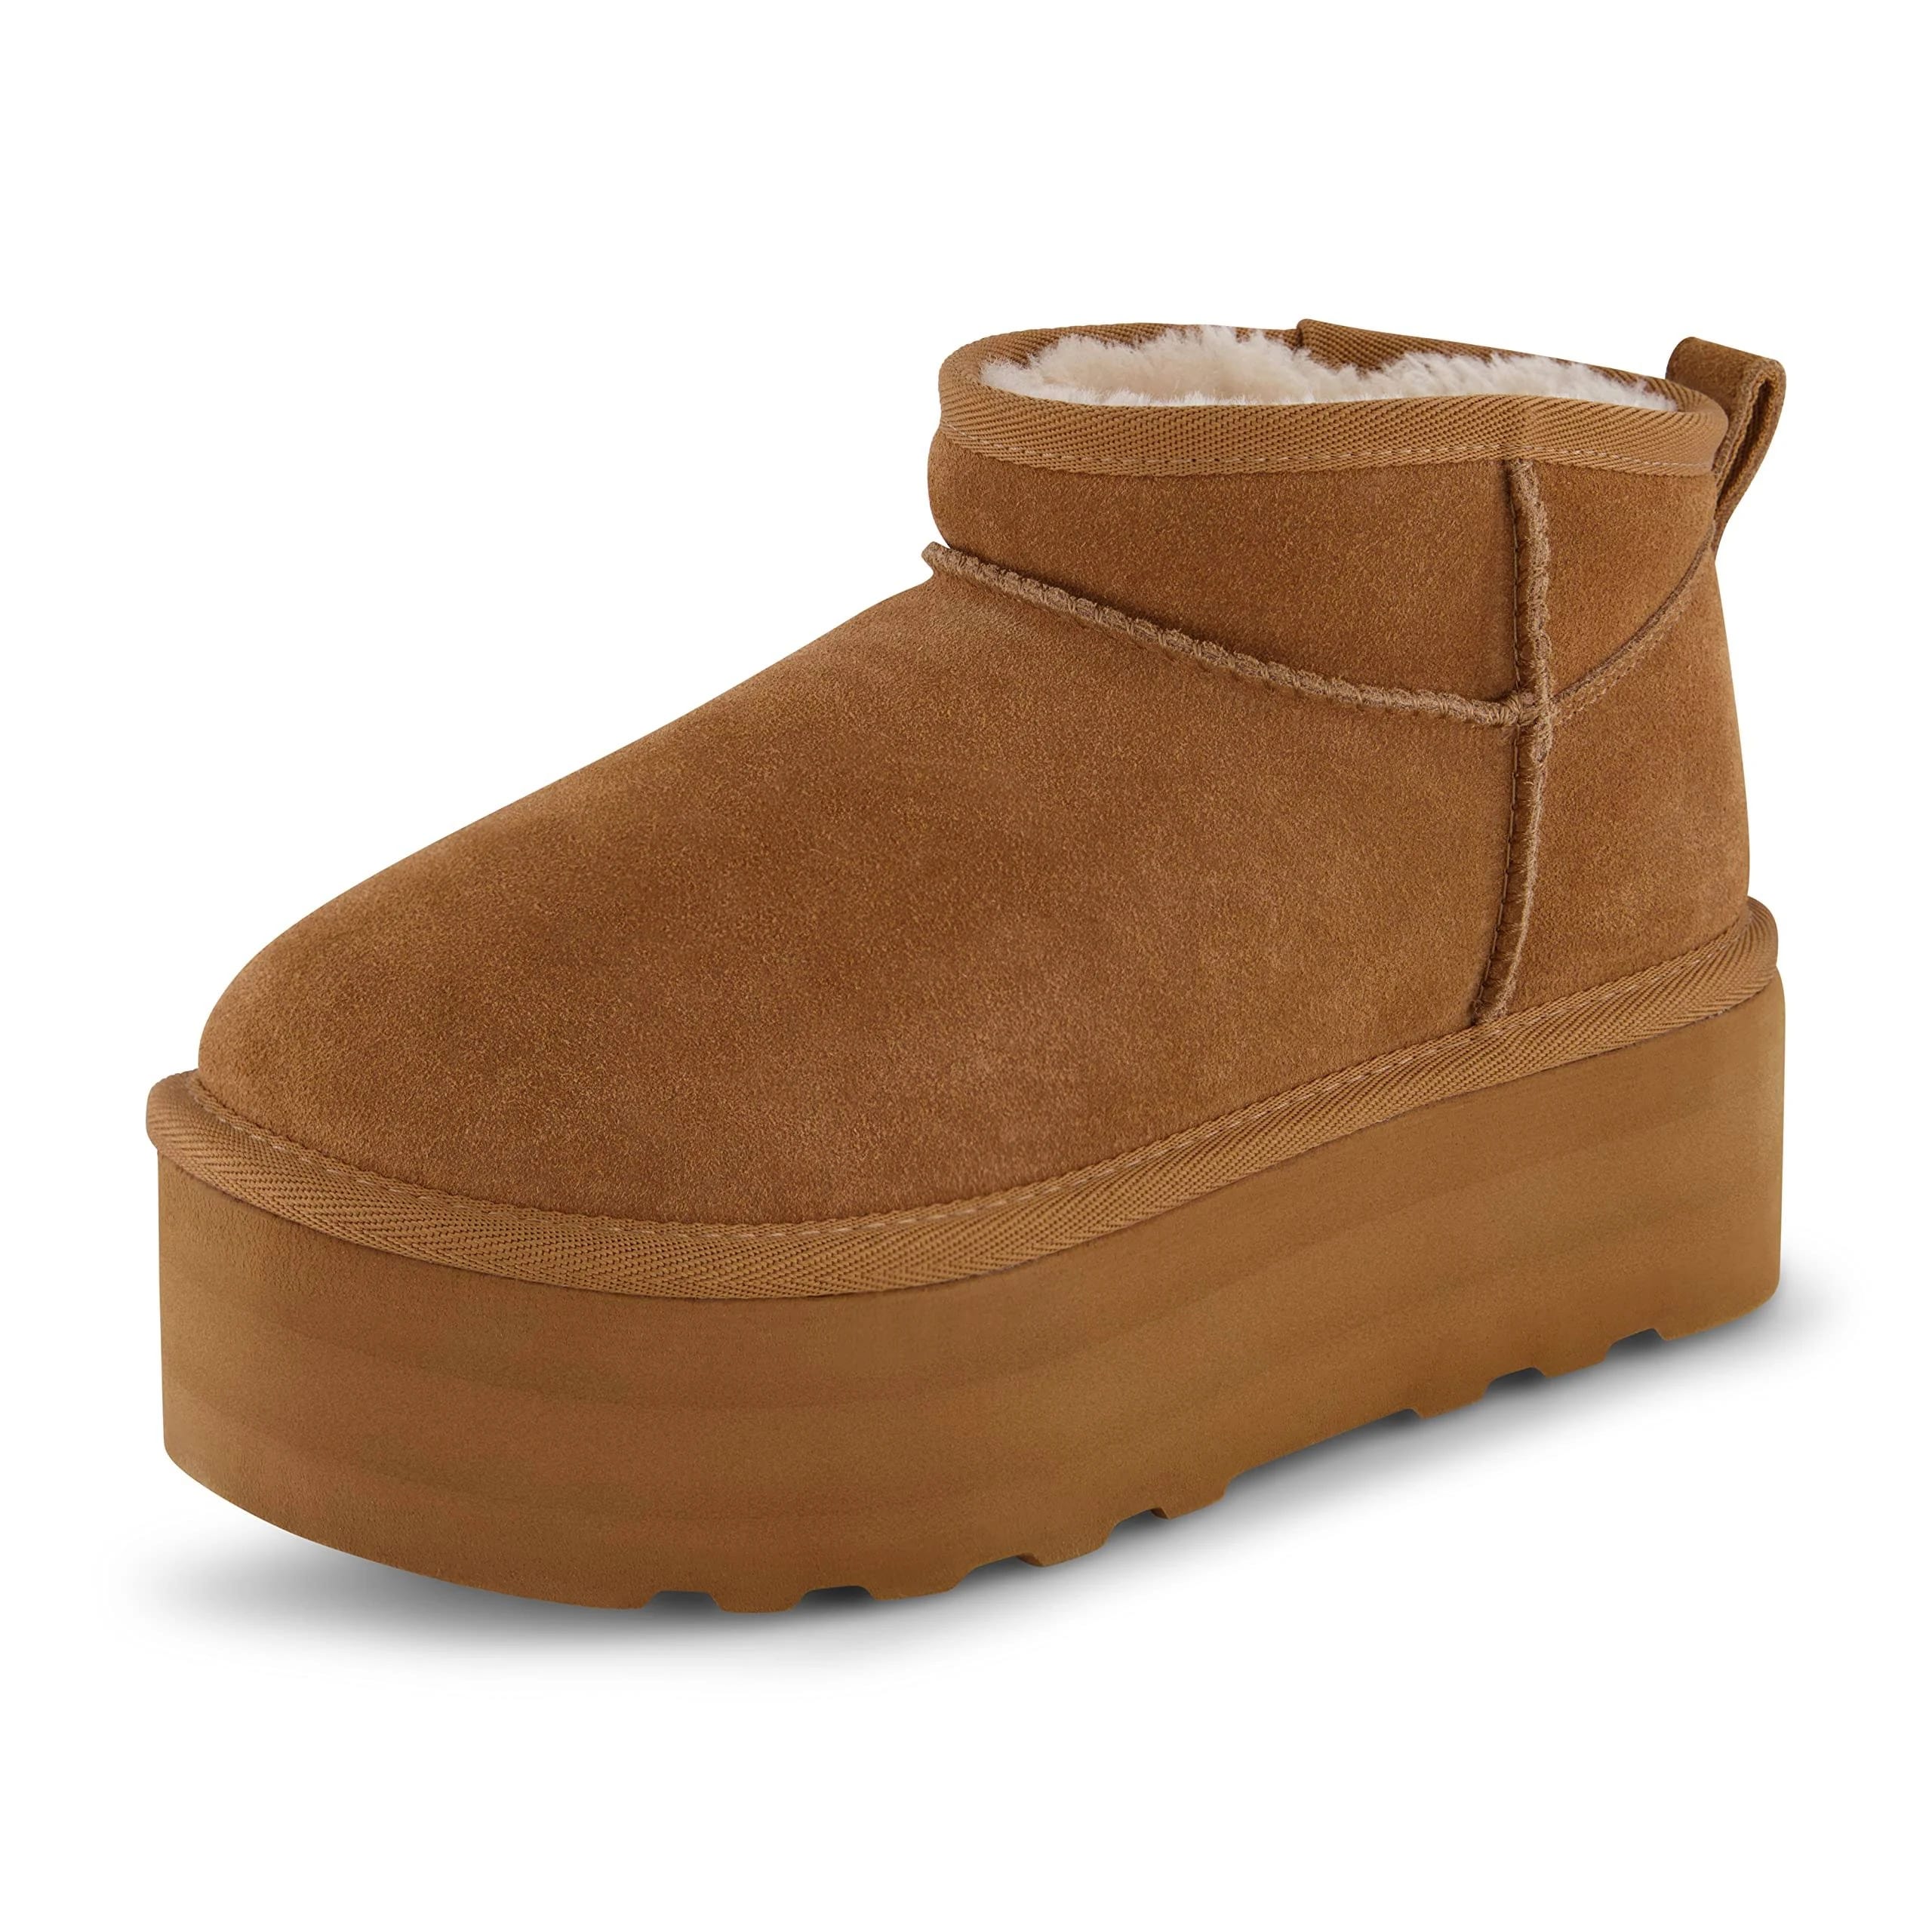 Cozy Suede Platform Boot with Memory Foam Cushioning and Slip-On Design | Image